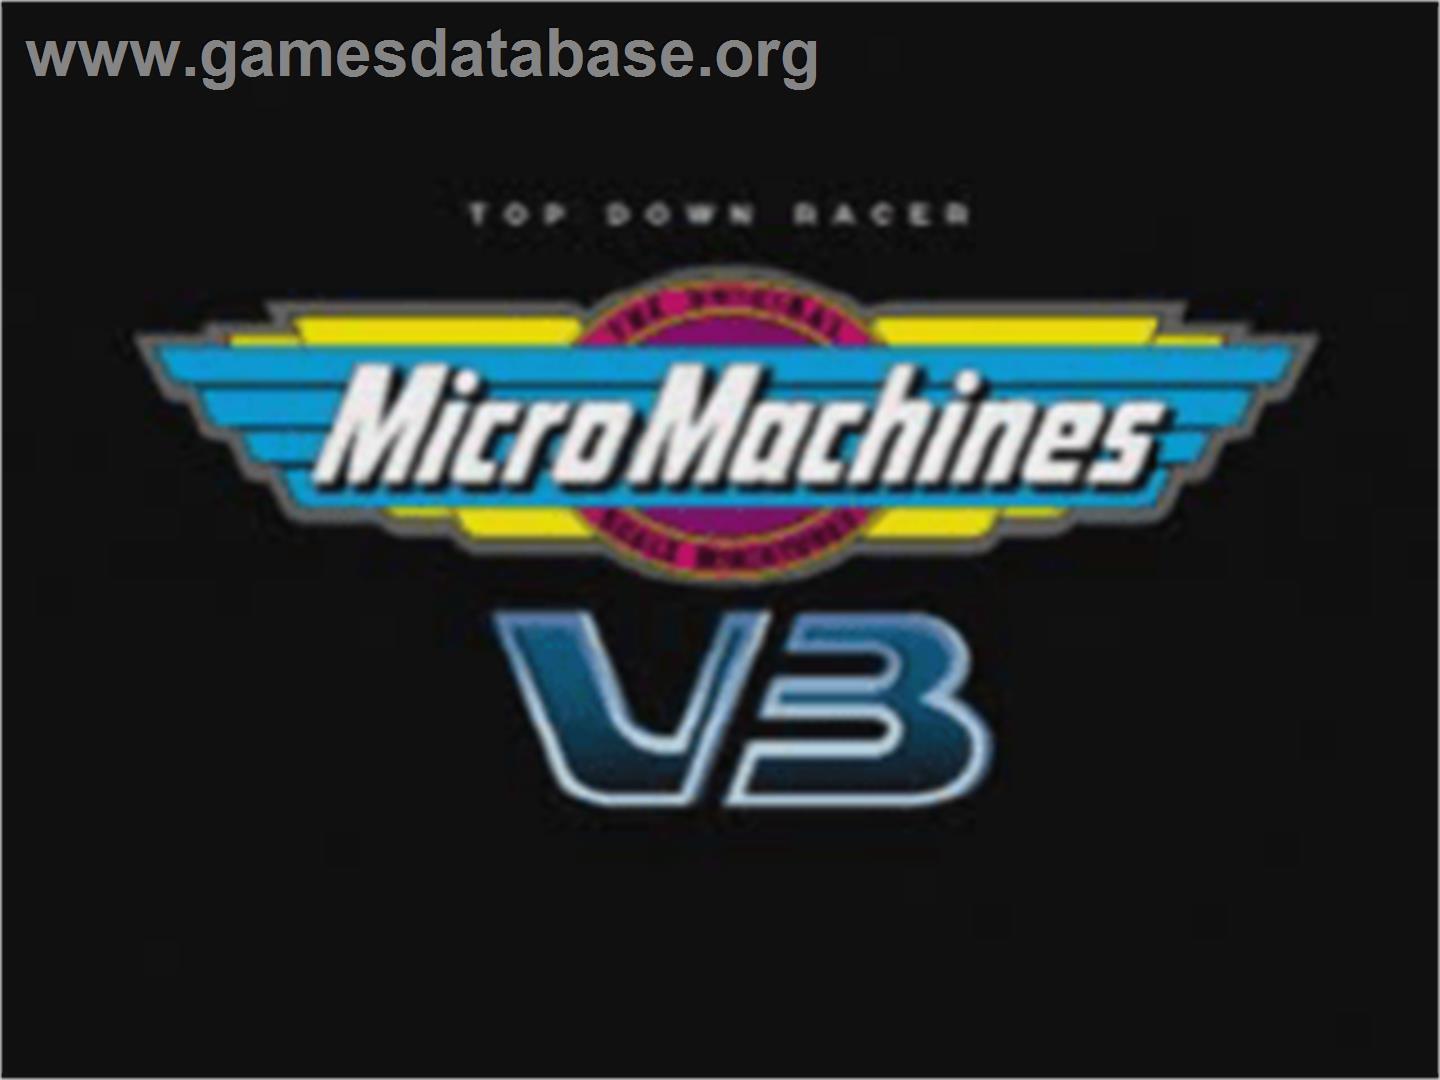 Micro Machines V3 - Sony Playstation - Artwork - Title Screen